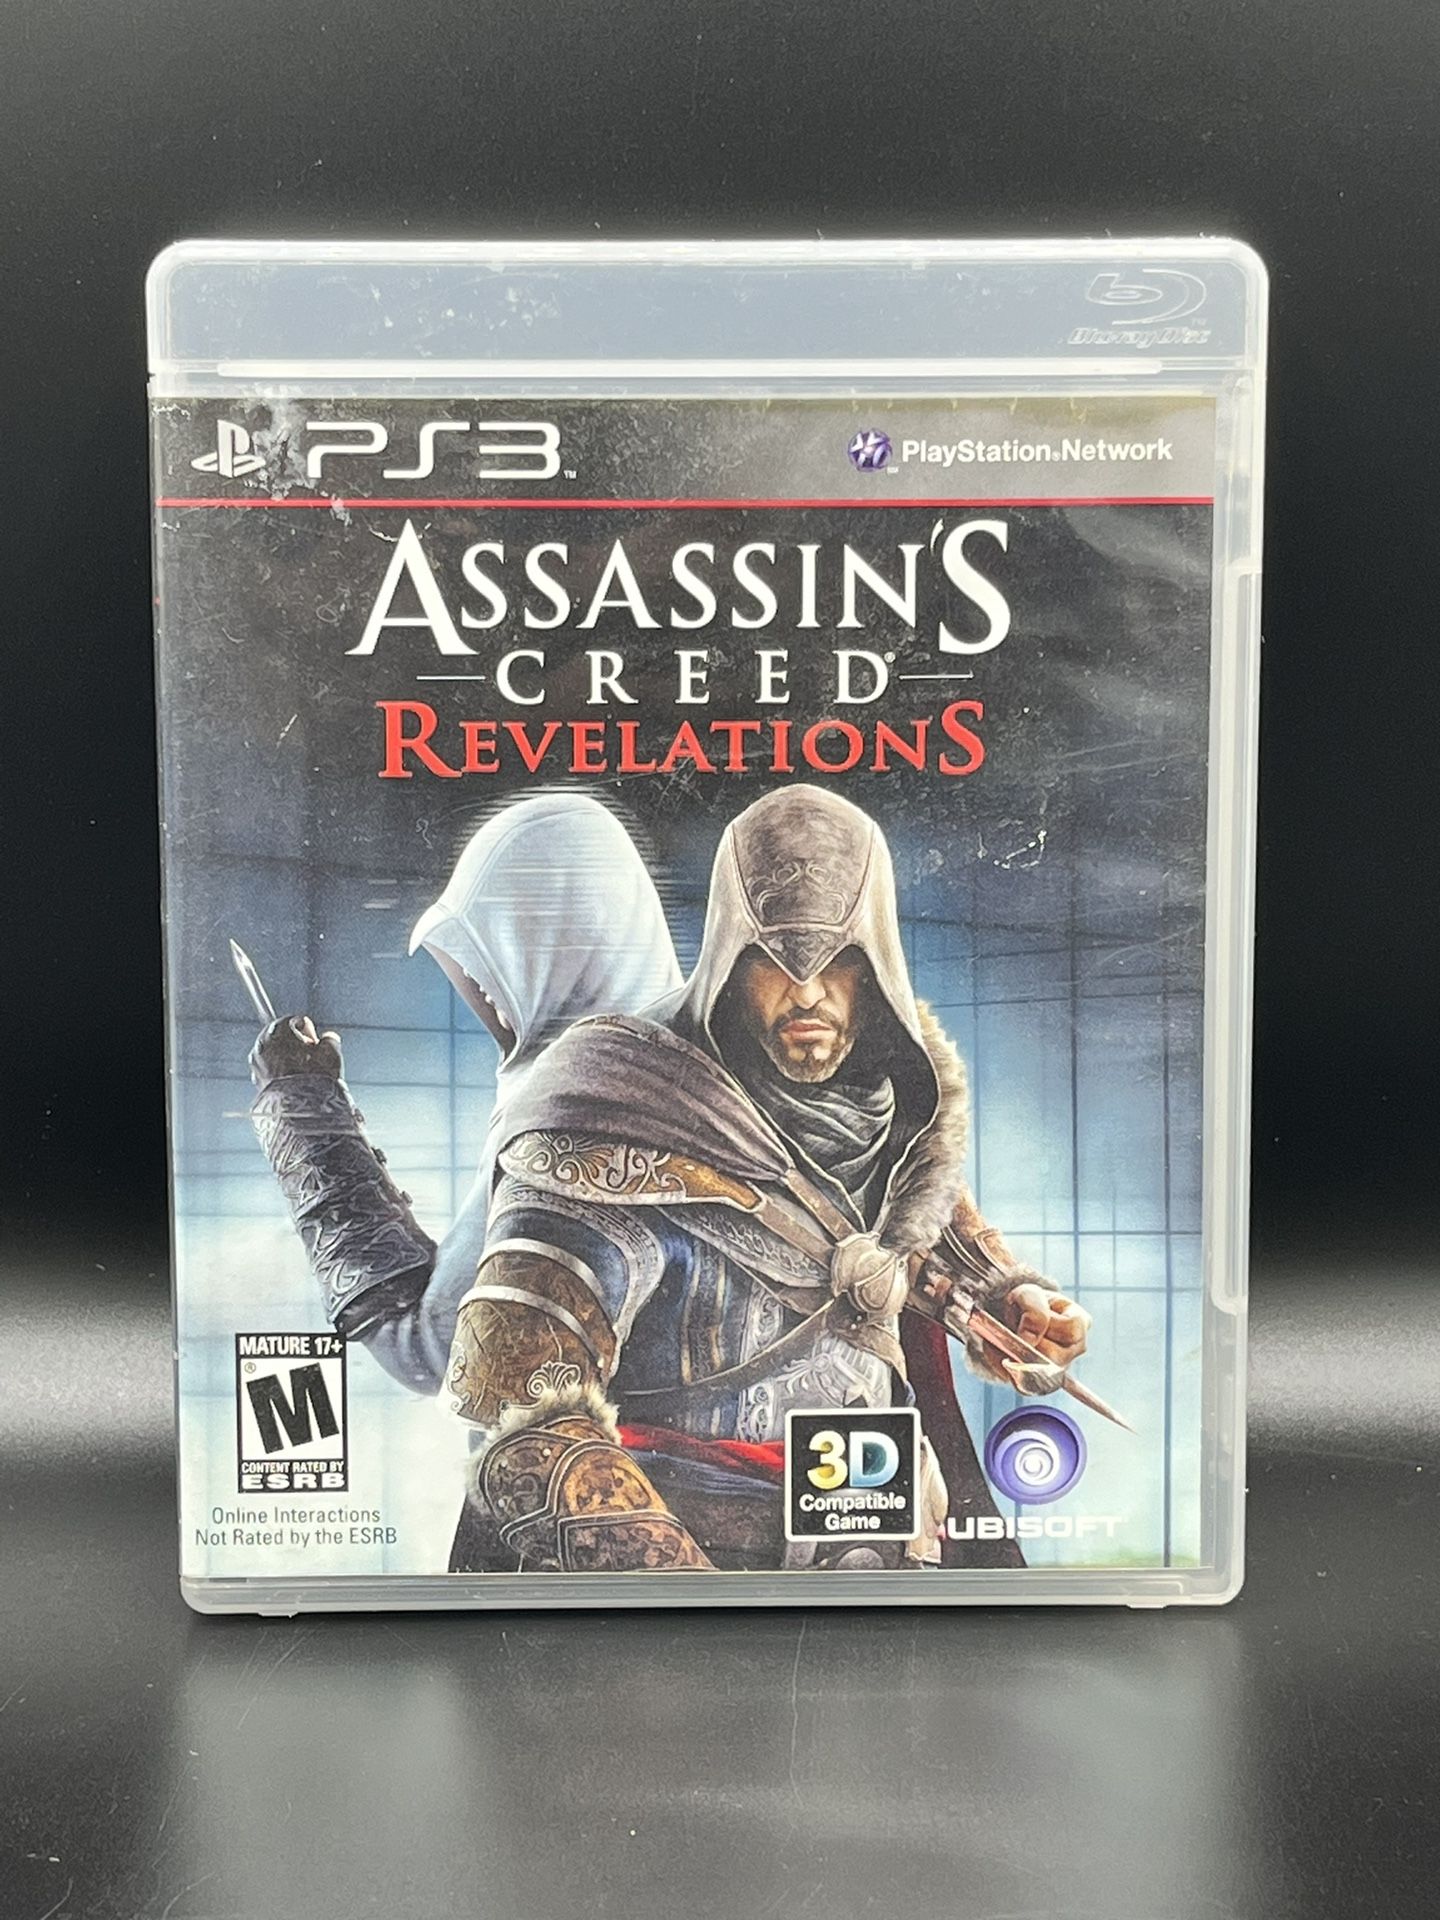 Assassin’s Creed revelations (PS3)